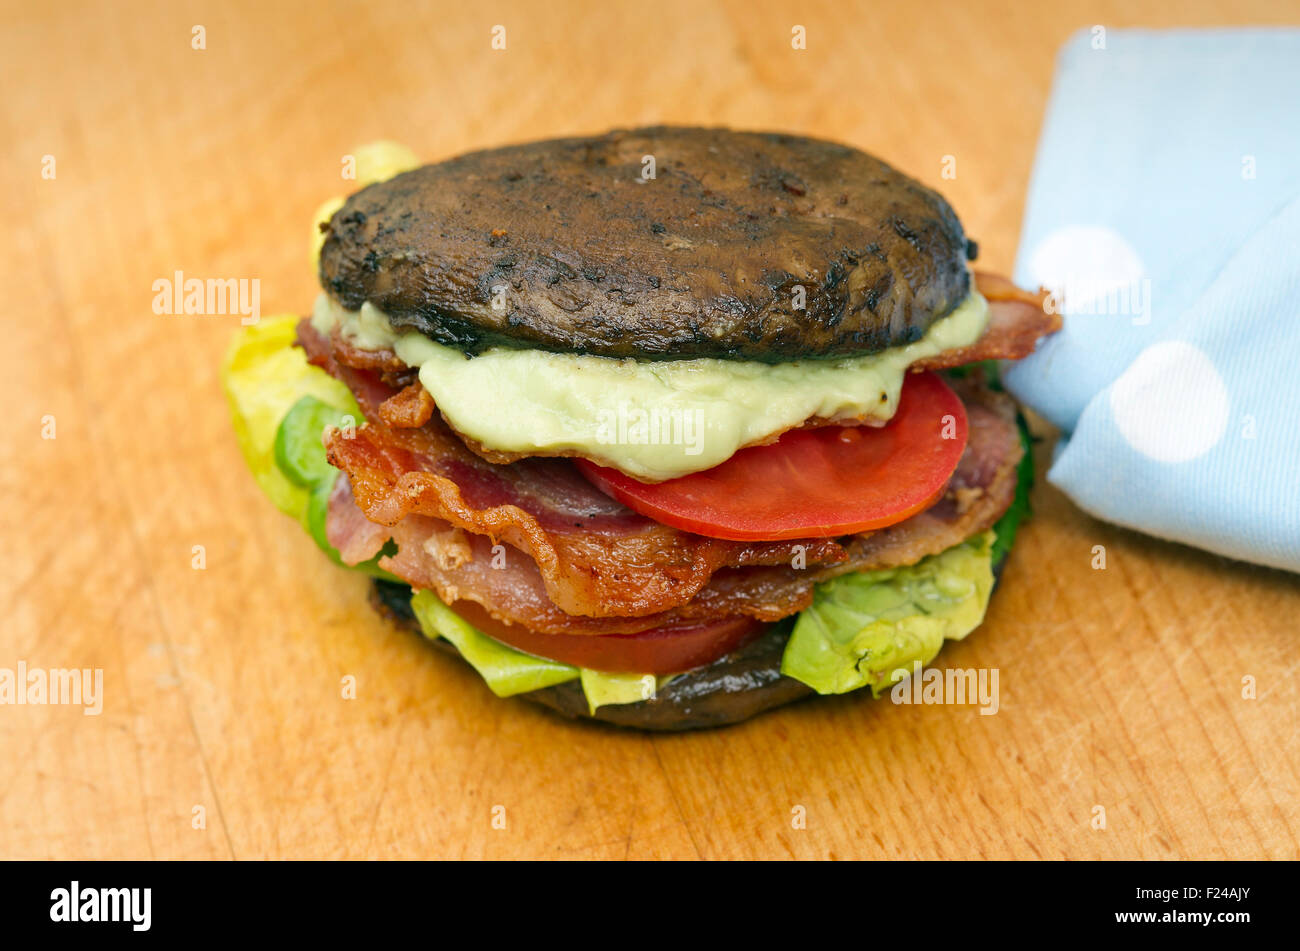 Paleo diet food, paleo bacon with lettuce and tomato sandwich, supposedly based on 'cave man' Palaeolithic food for health. a UK Stock Photo